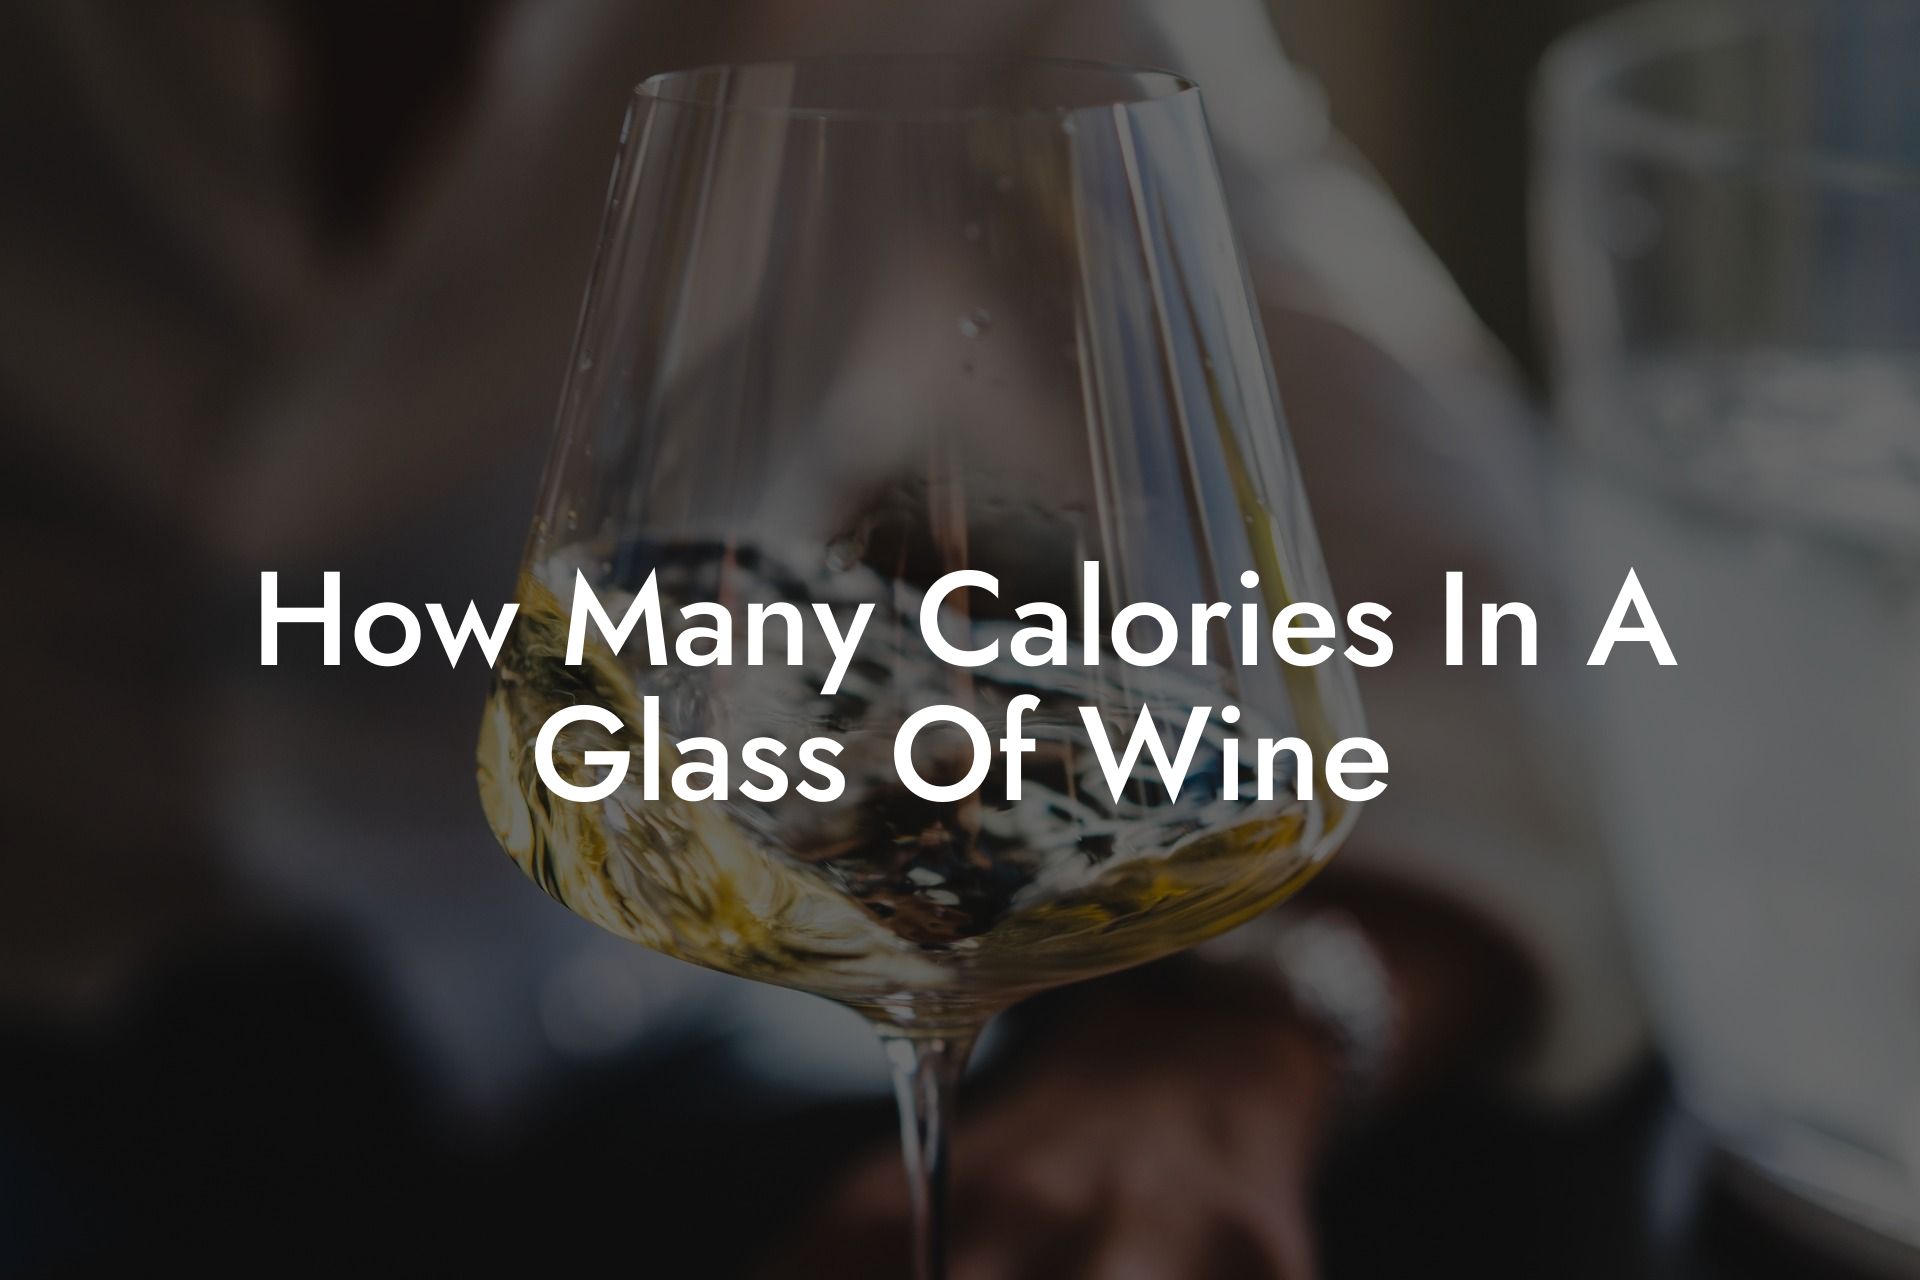 How Many Calories In A Glass Of Wine